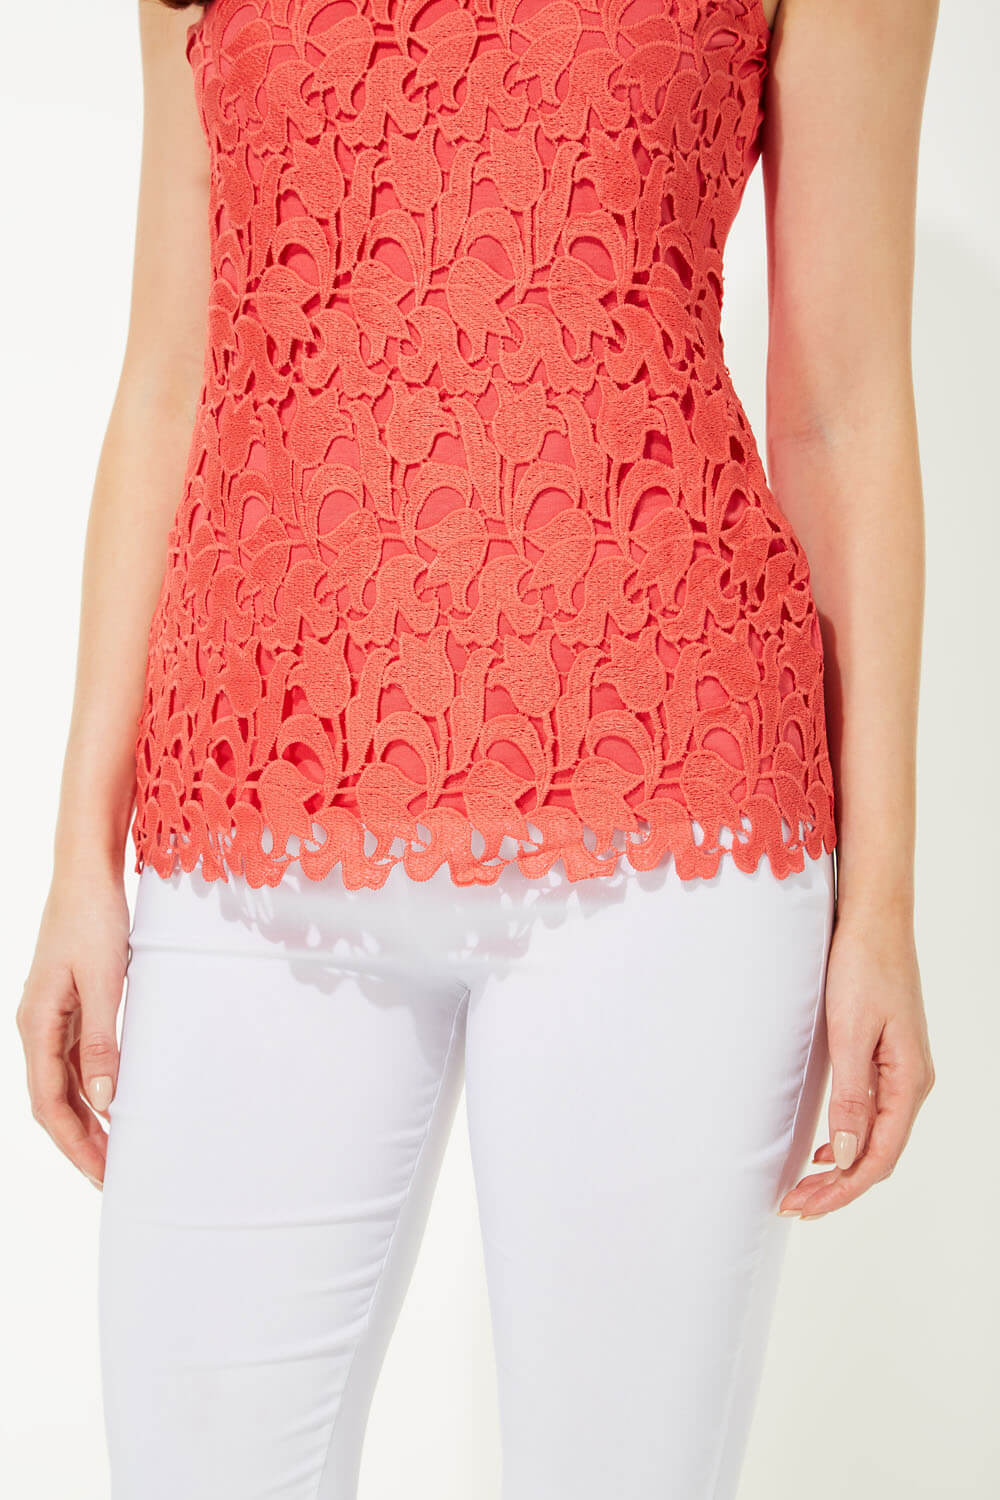 CORAL Floral Lace Front Sleeveless Top, Image 4 of 5